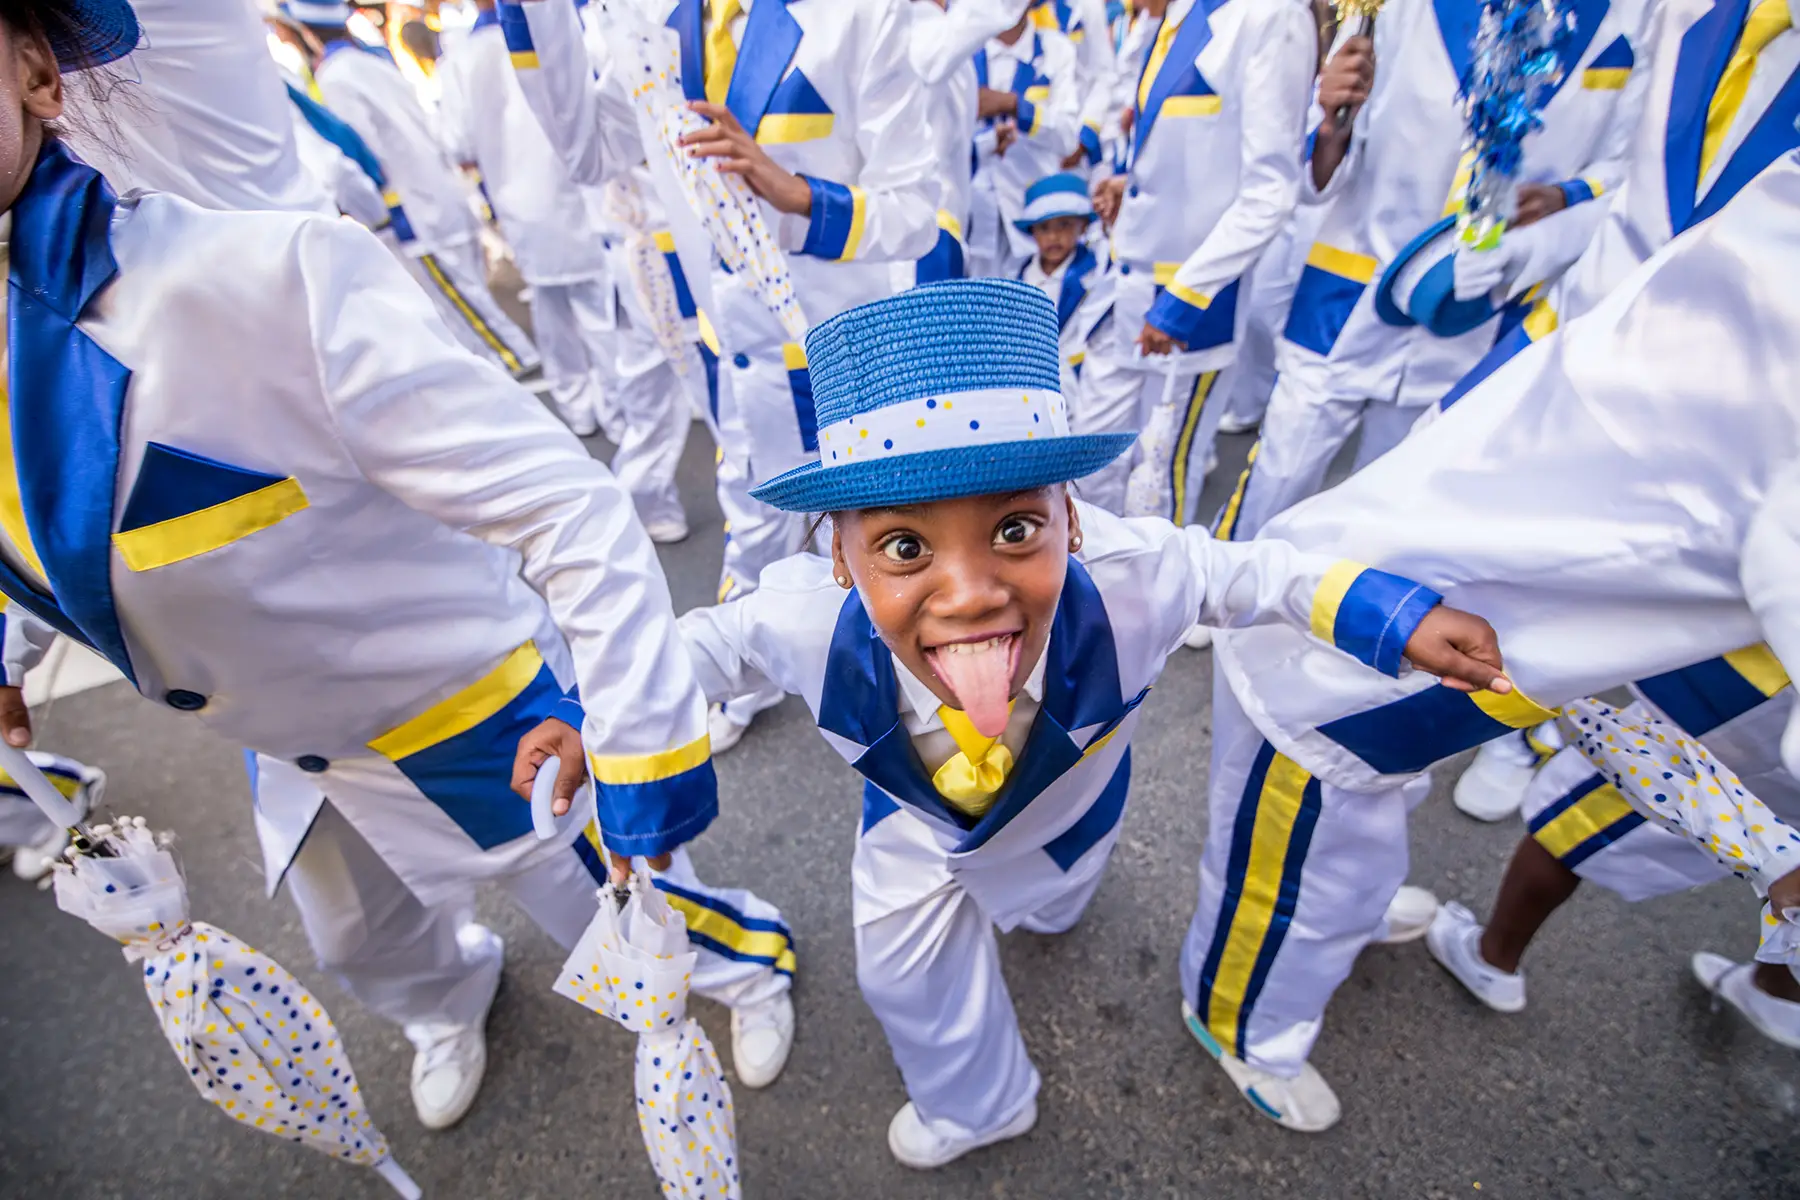 A young boy in white suite with blue and yellow details sticks his tongue out at camera. He is taking part in the Cape Minstrel Carnival (Kaapse Klopse) on the second day of New Year, a traditional parade in Cape Town